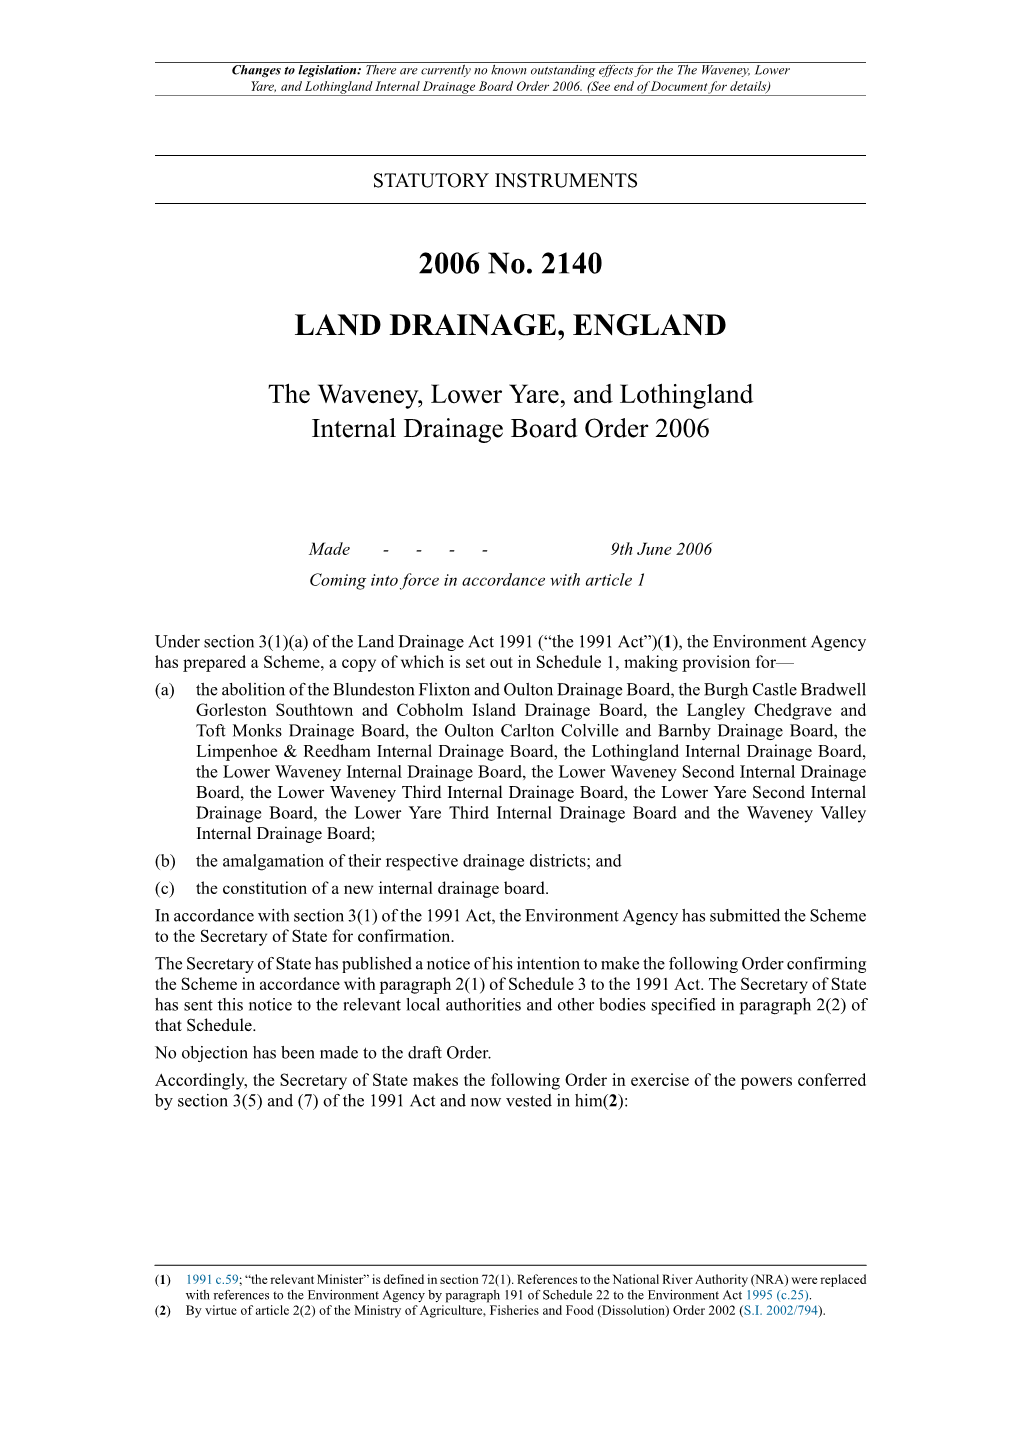 The Waveney, Lower Yare, and Lothingland Internal Drainage Board Order 2006